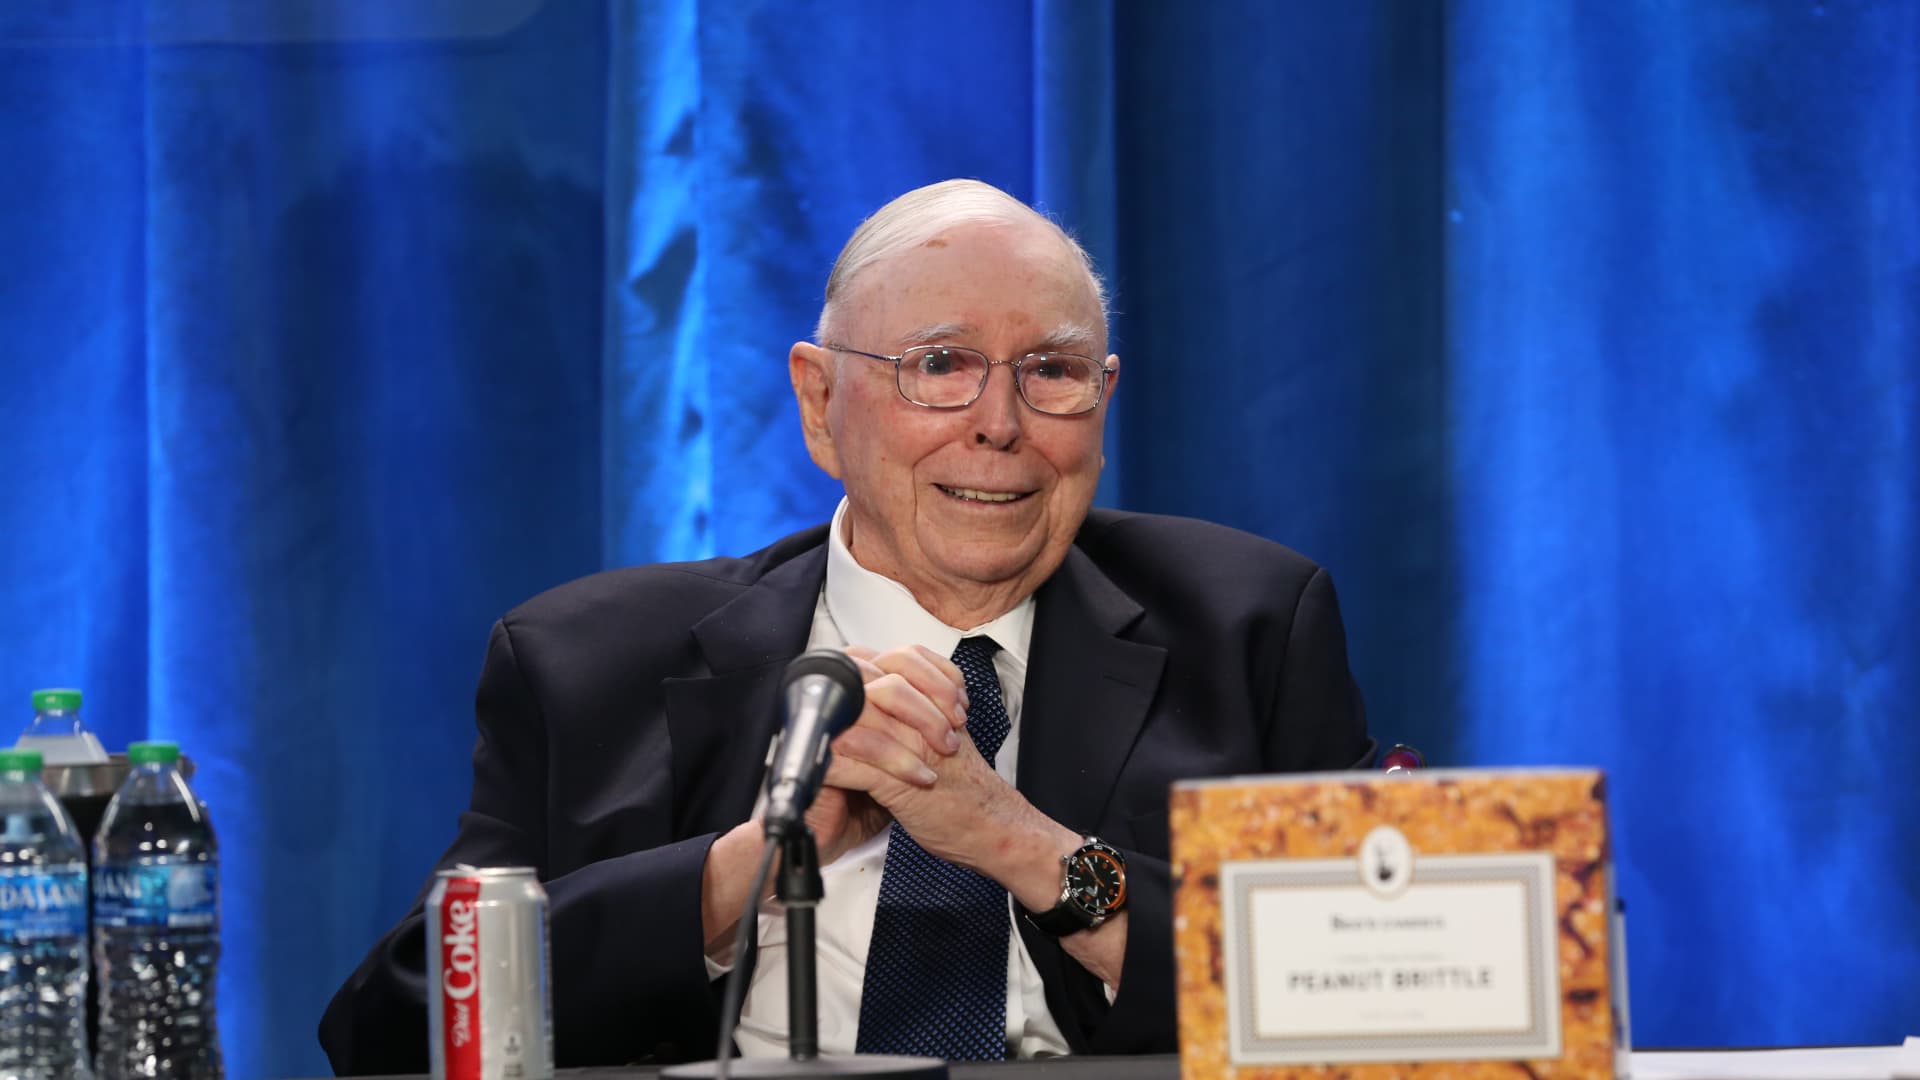 Charlie Munger’s wisdom and irreverence: Investors mourn a legend